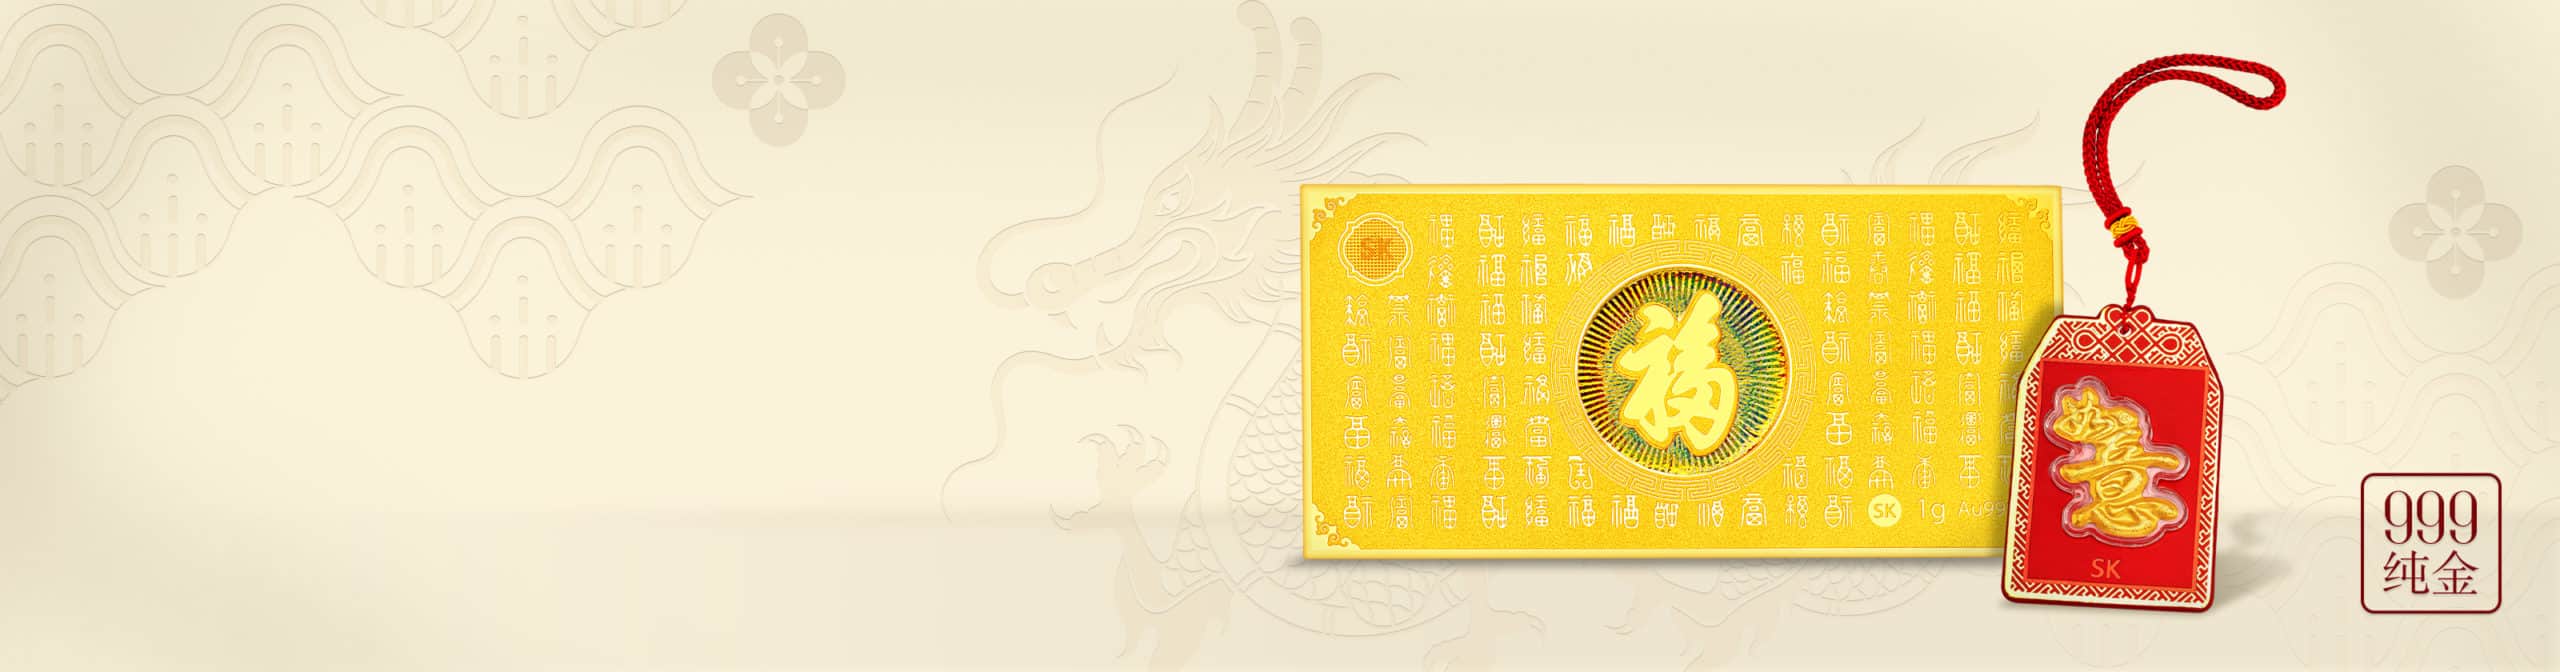 SK Jewellery Gold Bar & Gold Coins Banner